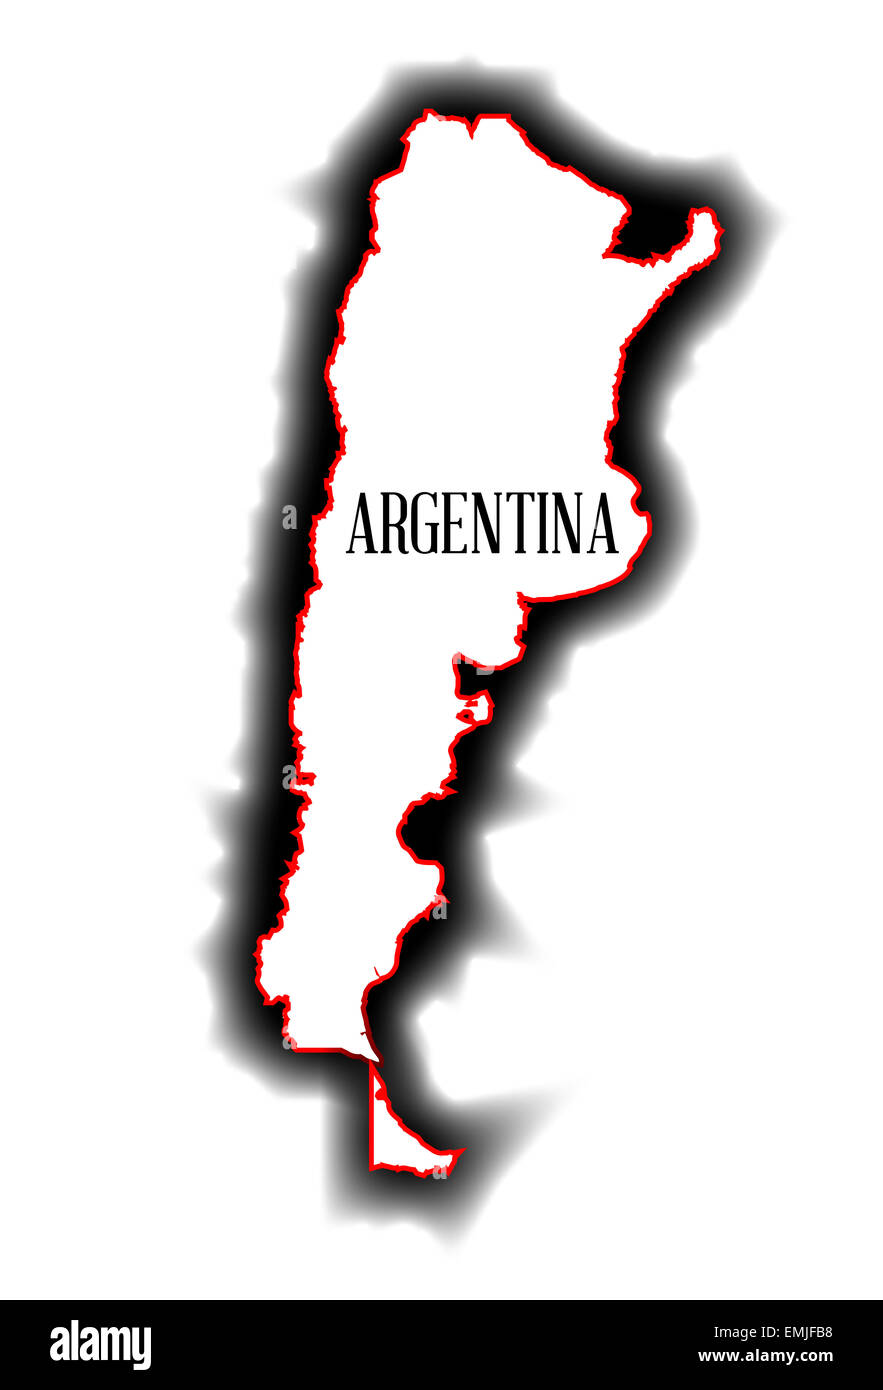 Outline blank map of the South American country of Argentina Stock Photo